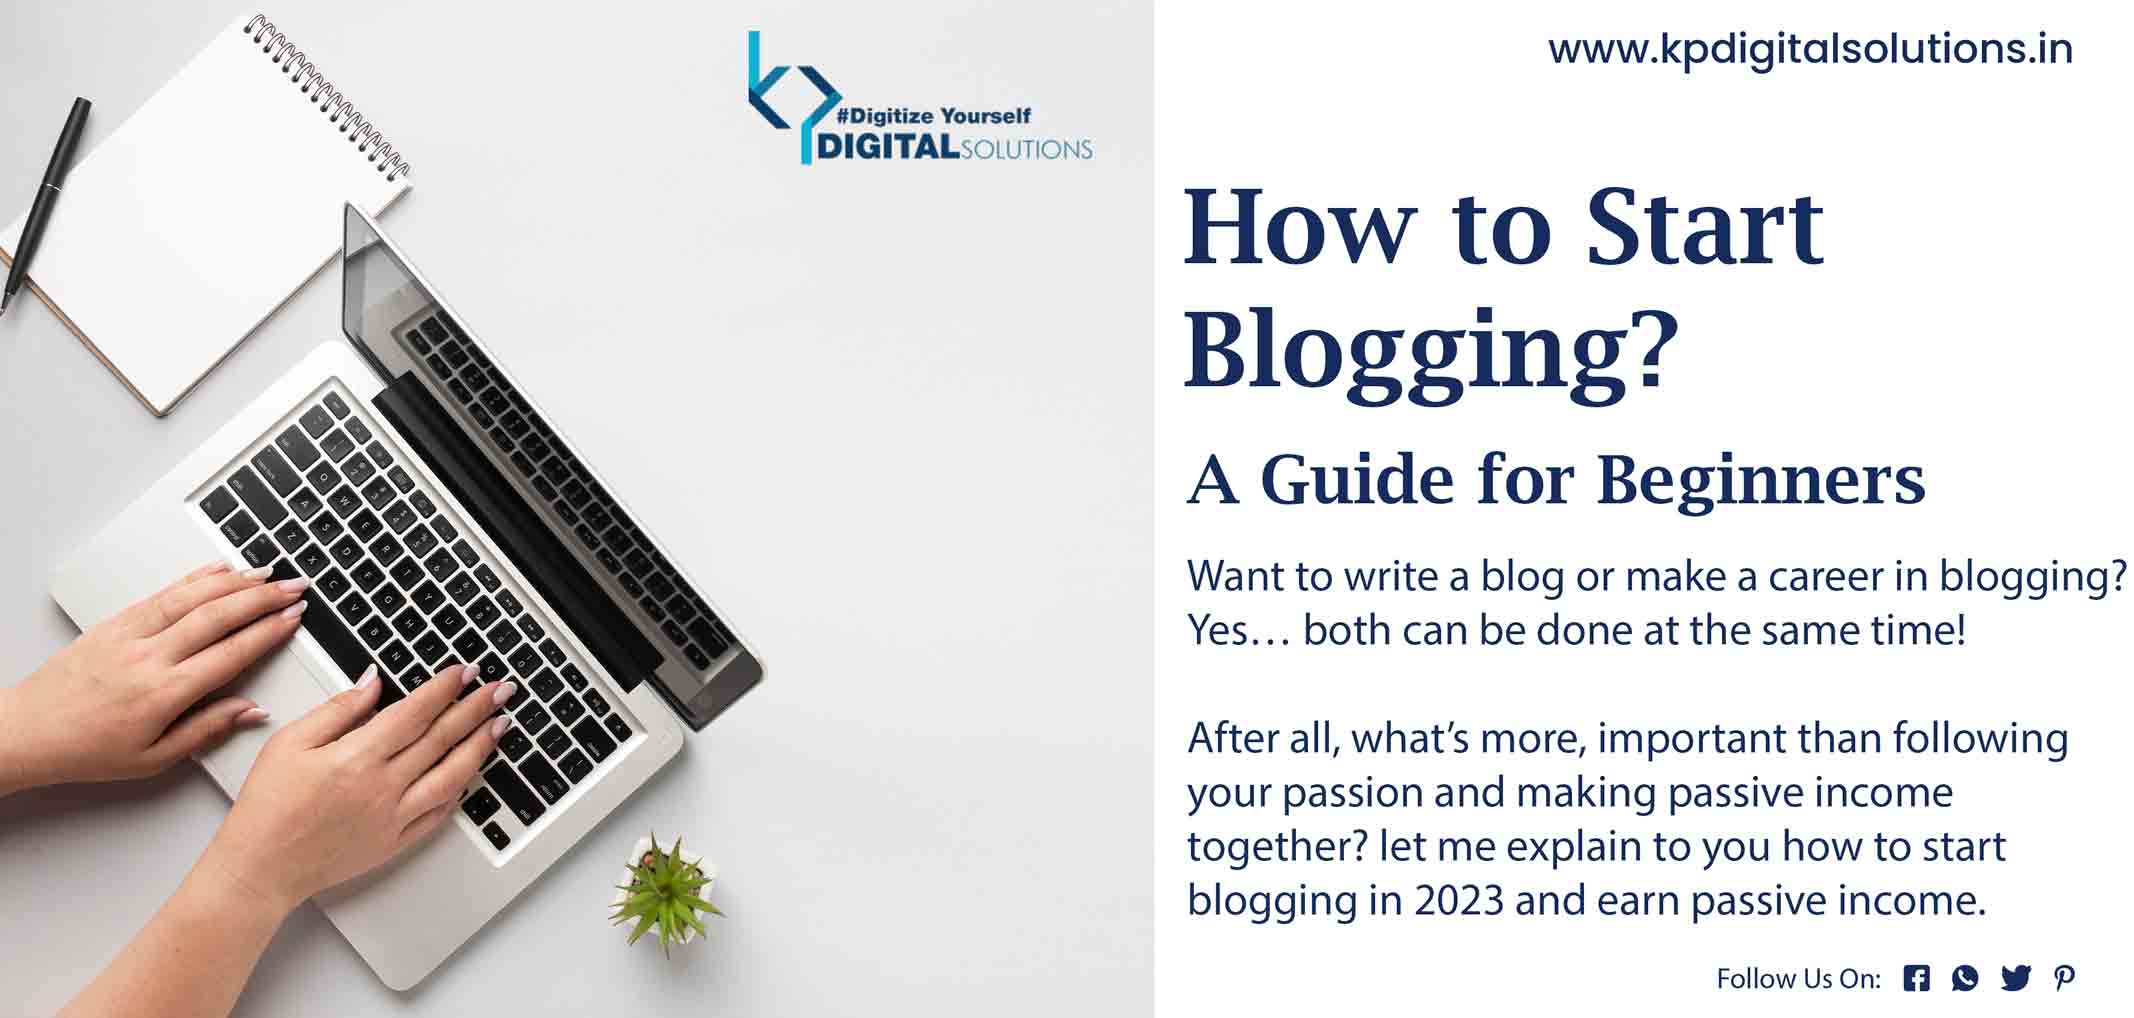 How to Start Blogging in 2023 [Blogging Guide for Beginners]